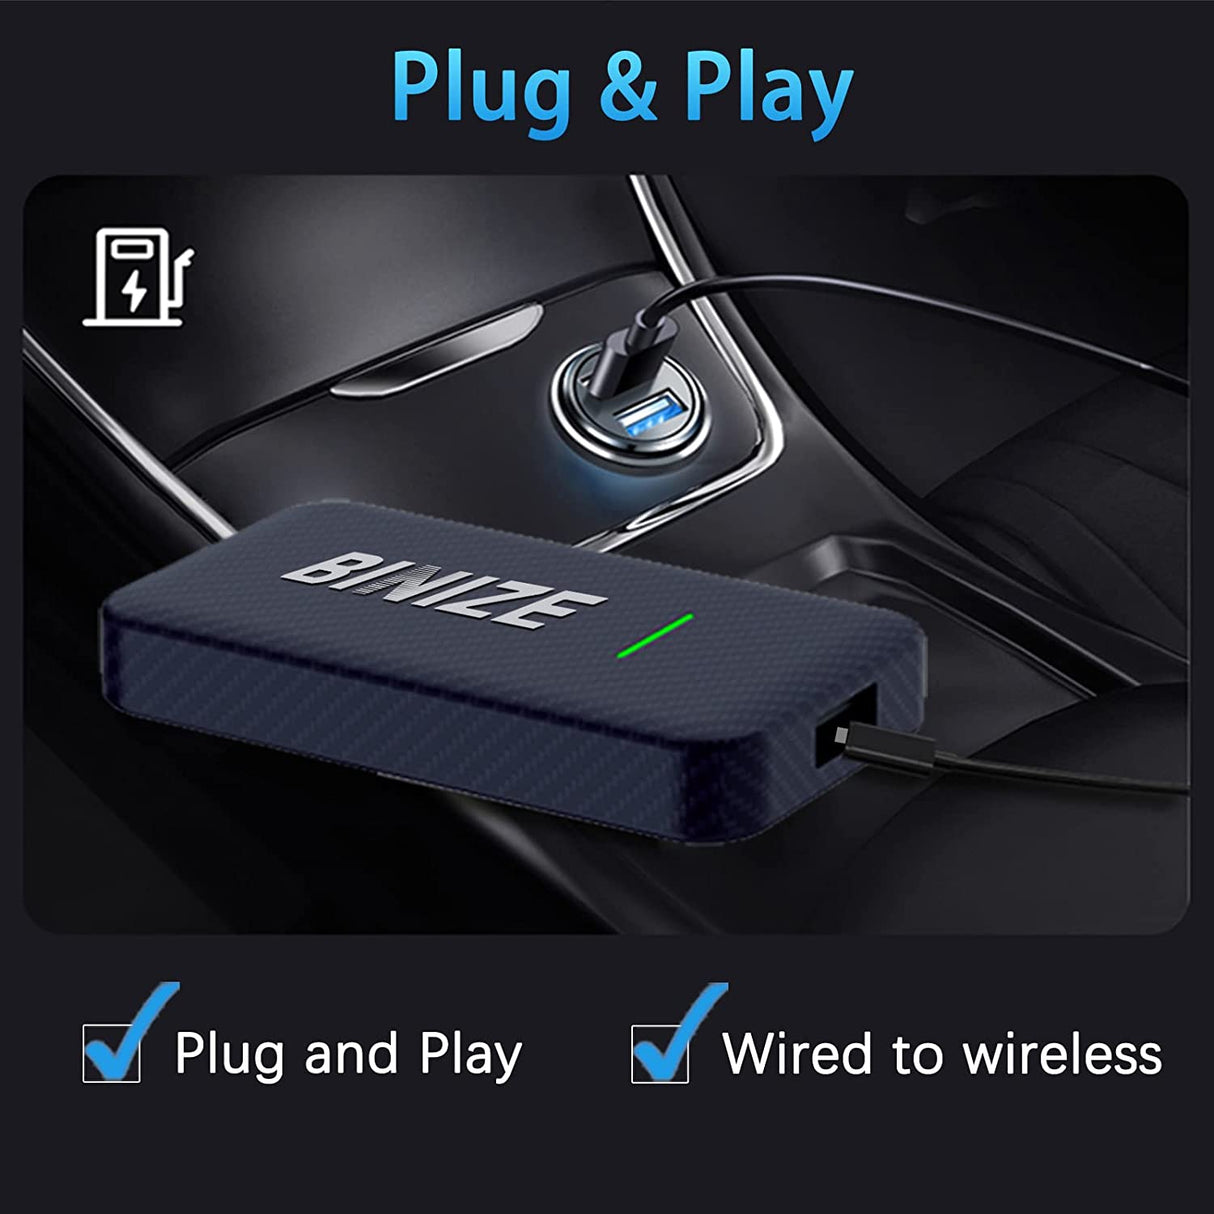 Binize Wireless Android AUTO Dongle para OEM Car con cable A-Auto